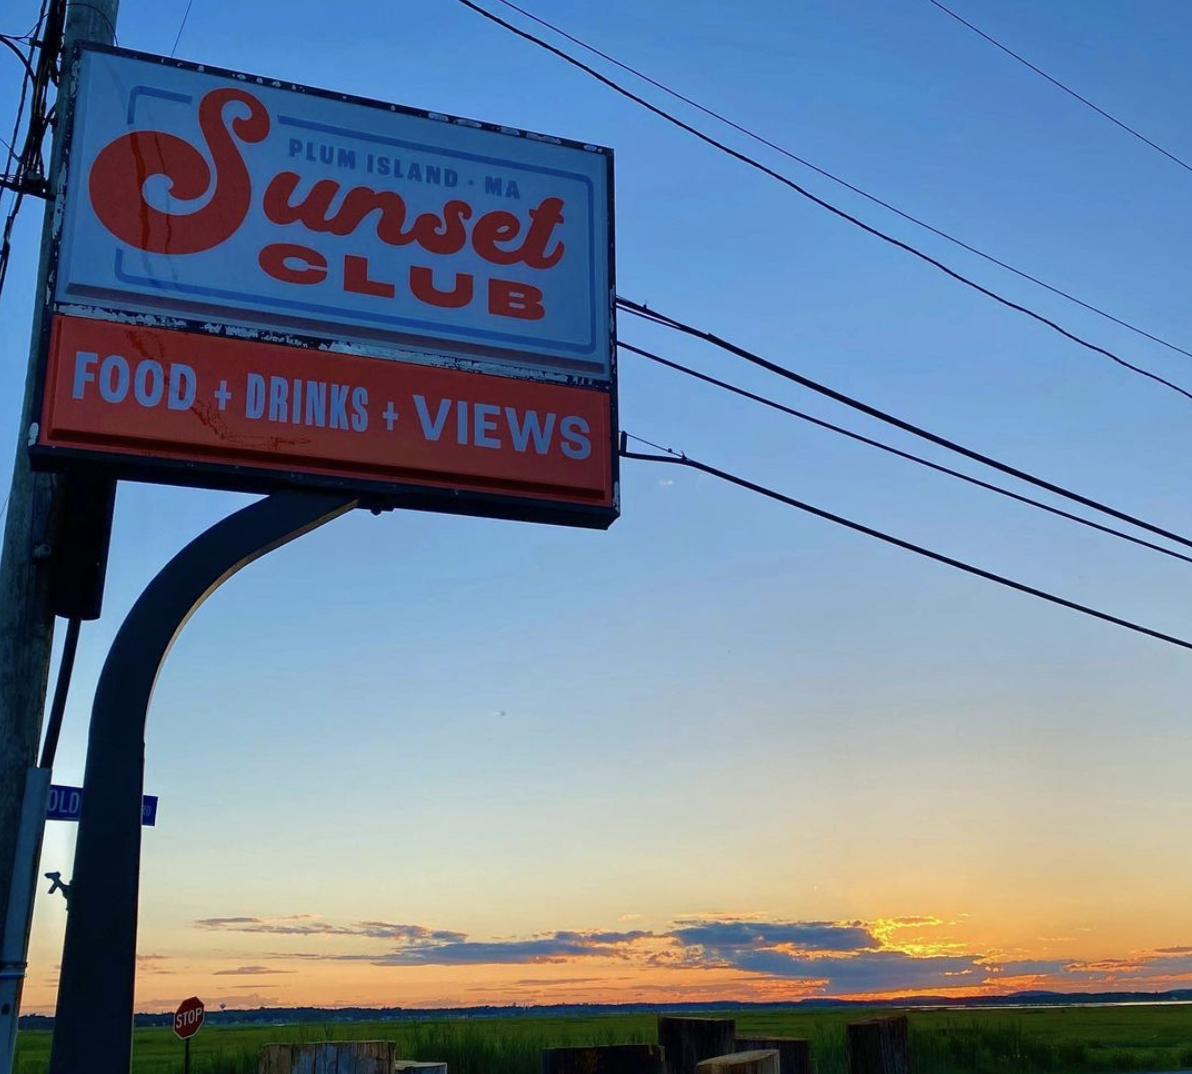 A white sign with orange text that reads “Sunset Club: Food + Drinks + Views” backdropped by a sunset over a marsh